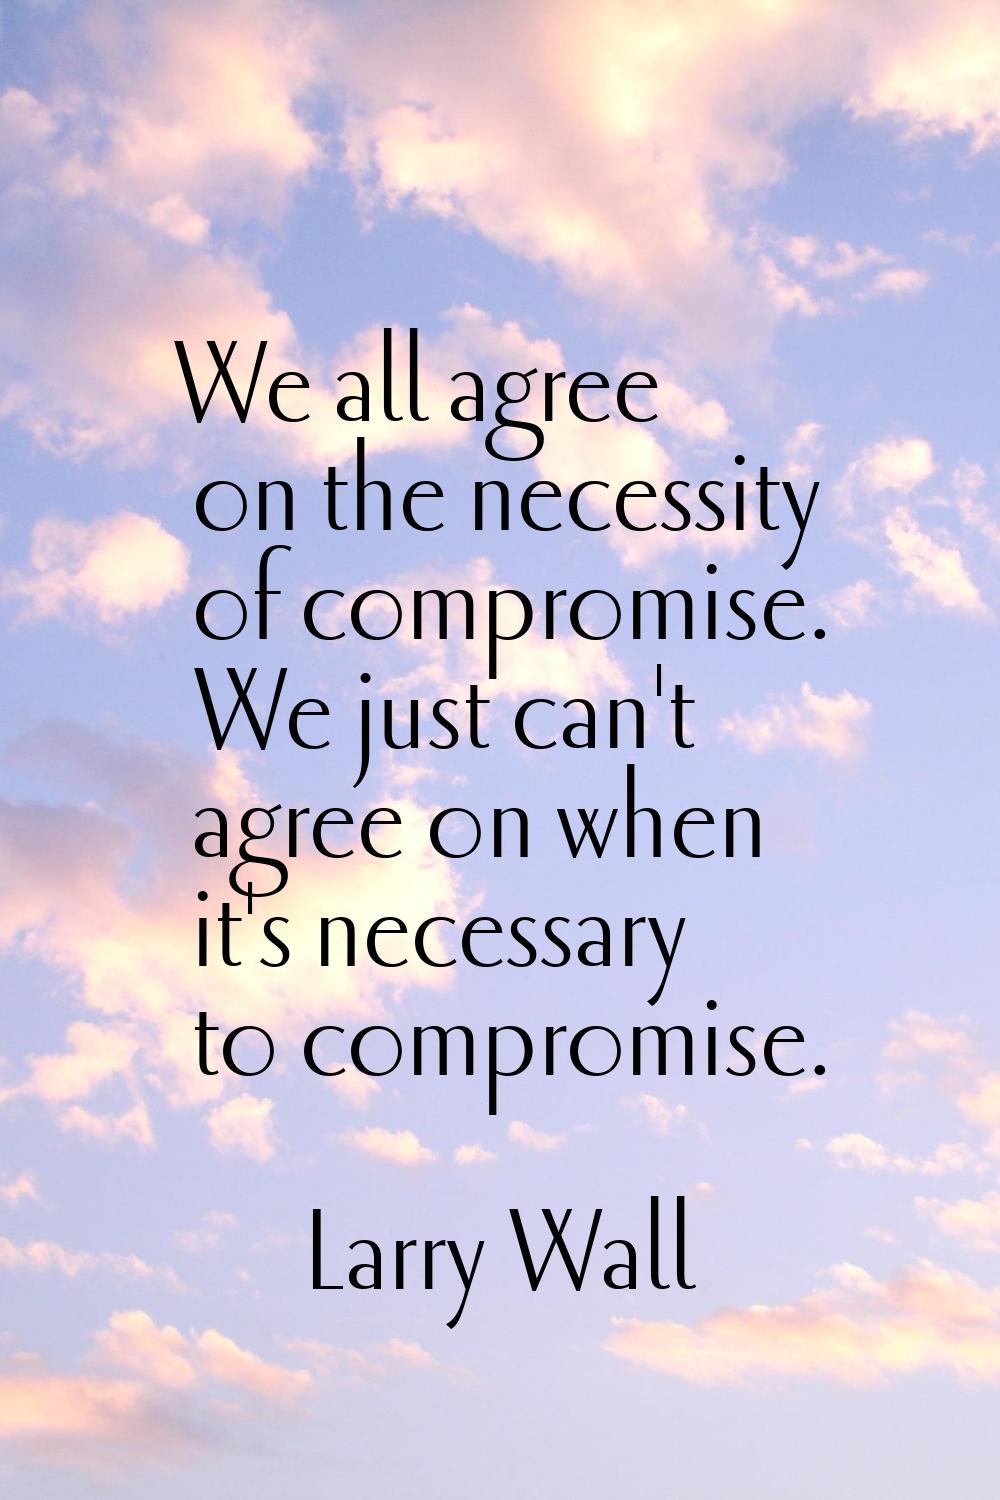 We all agree on the necessity of compromise. We just can't agree on when it's necessary to compromi